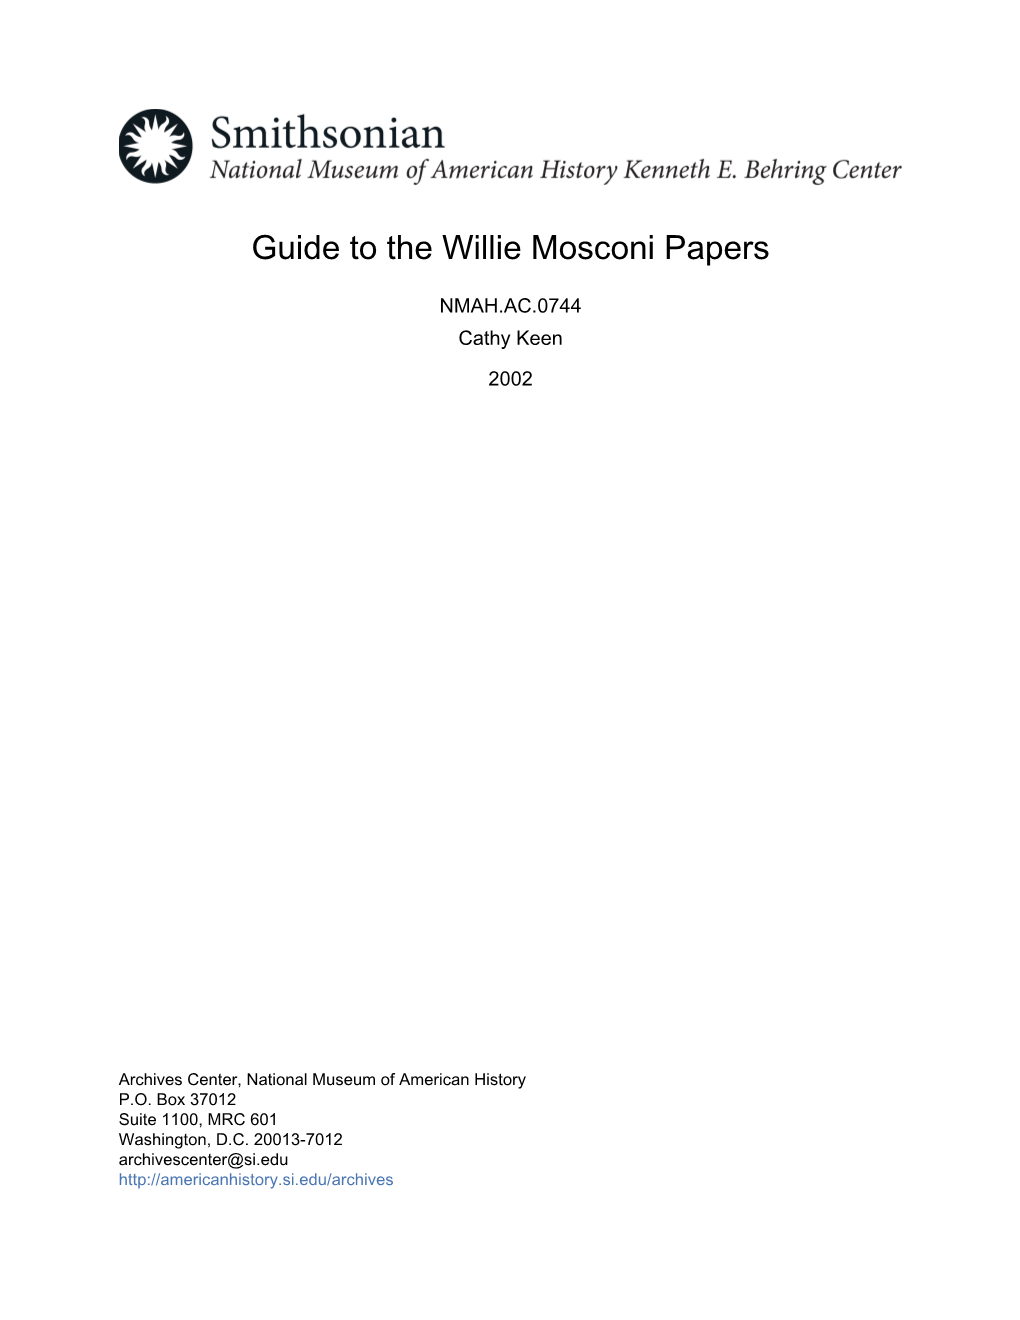 Guide to the Willie Mosconi Papers